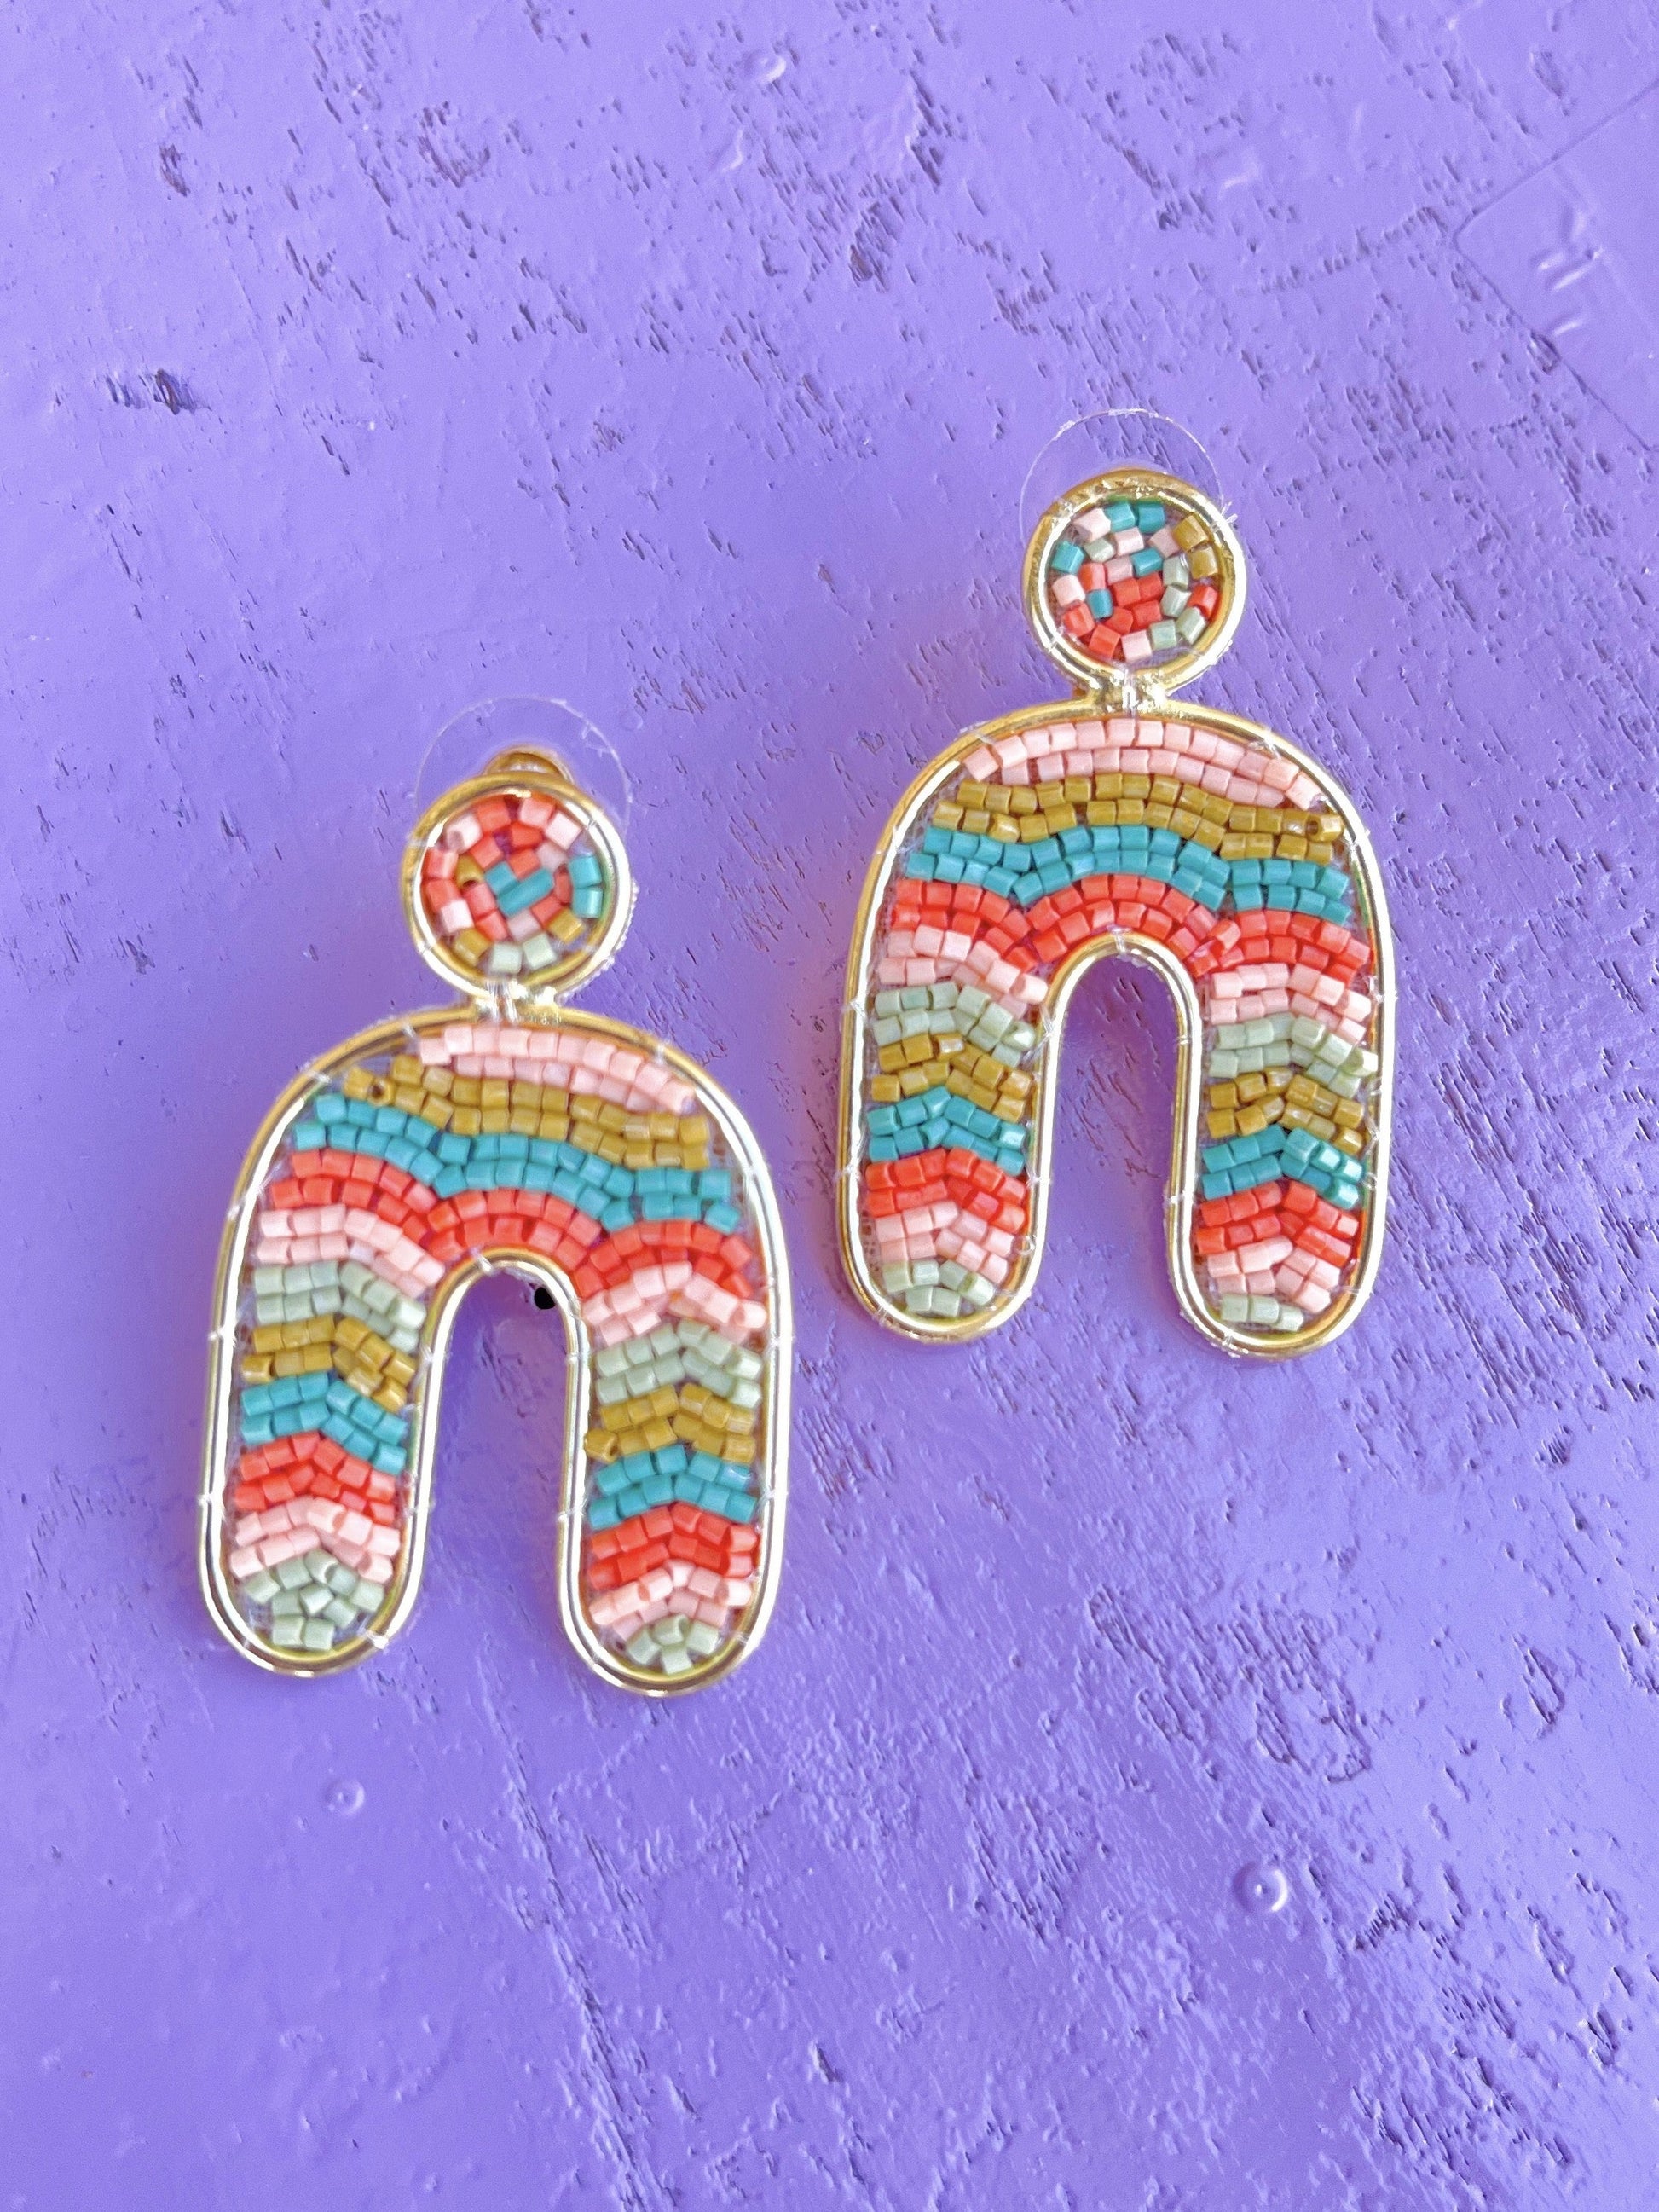 Somewhere Over the Rainbow Earrings-Earrings-Ink & Alloy-The Village Shoppe, Women’s Fashion Boutique, Shop Online and In Store - Located in Muscle Shoals, AL.